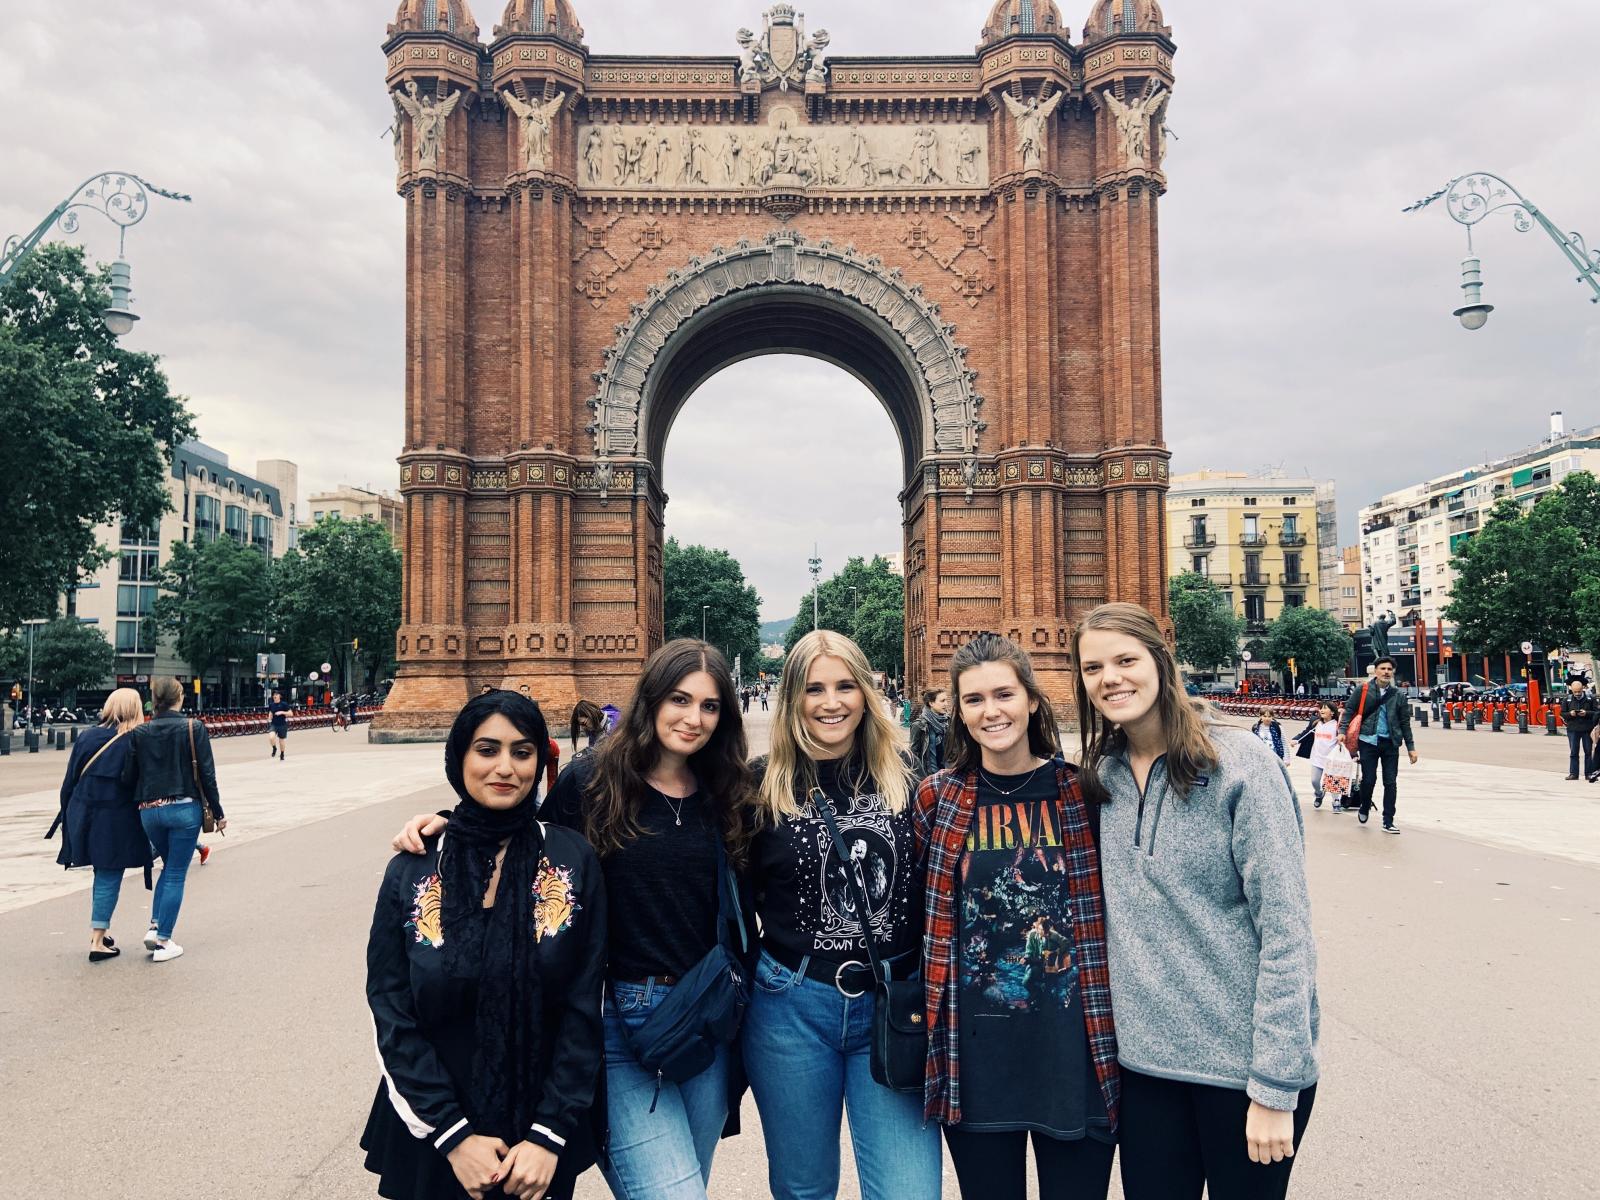 Group of girls outside in front of the Arc de Triomf in Barcelona.